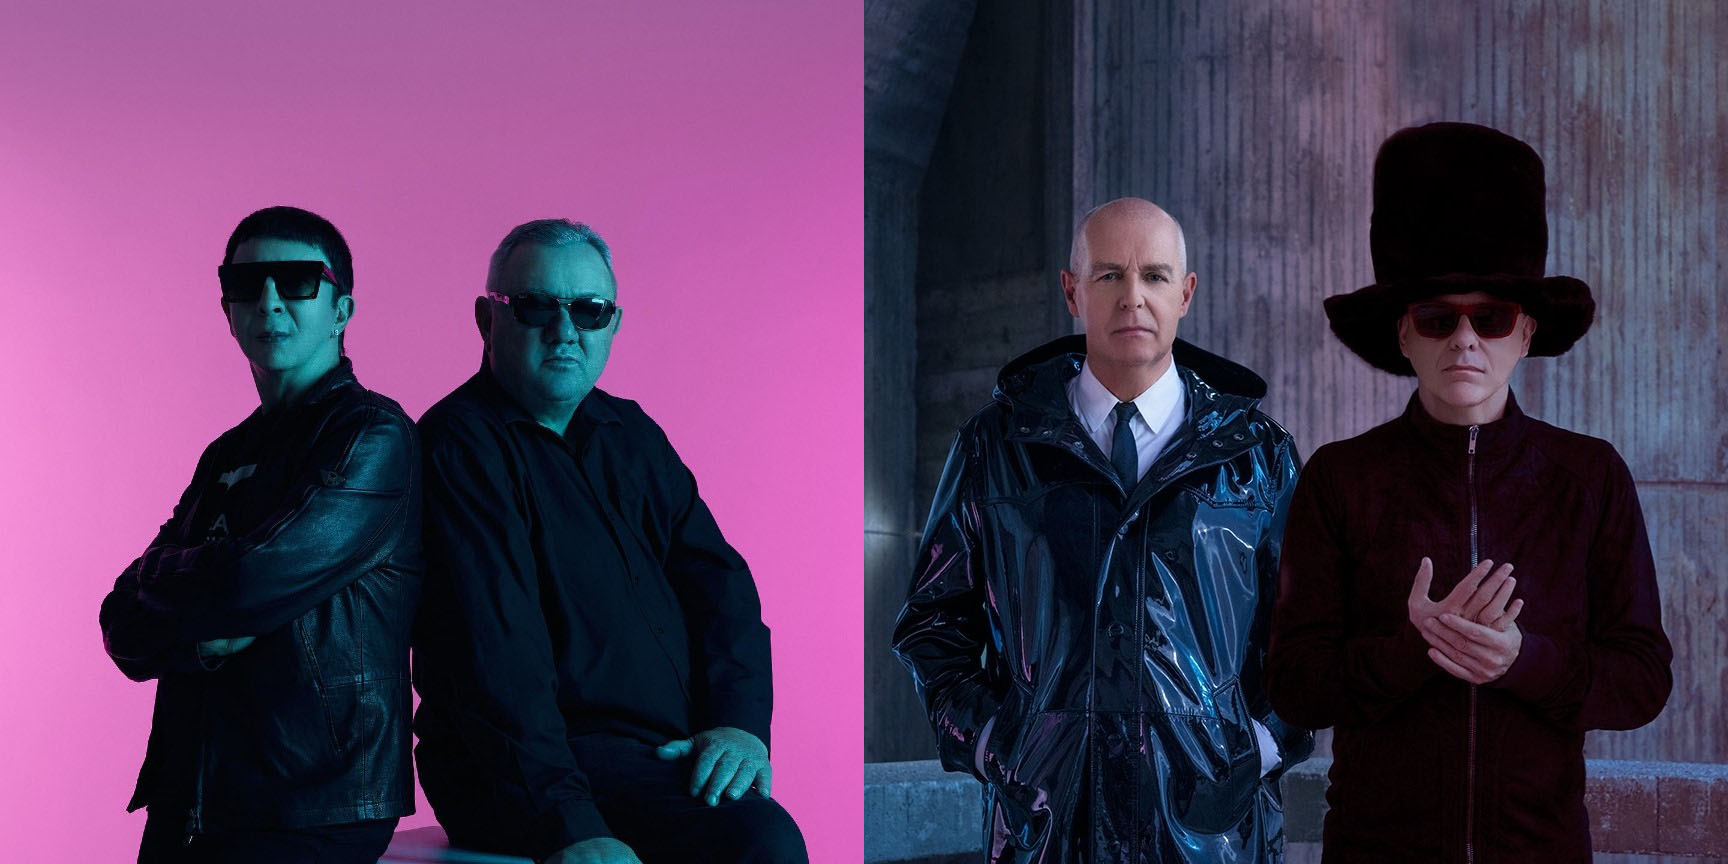 Soft Cell enlists Pet Shop Boys for single ahead of first new